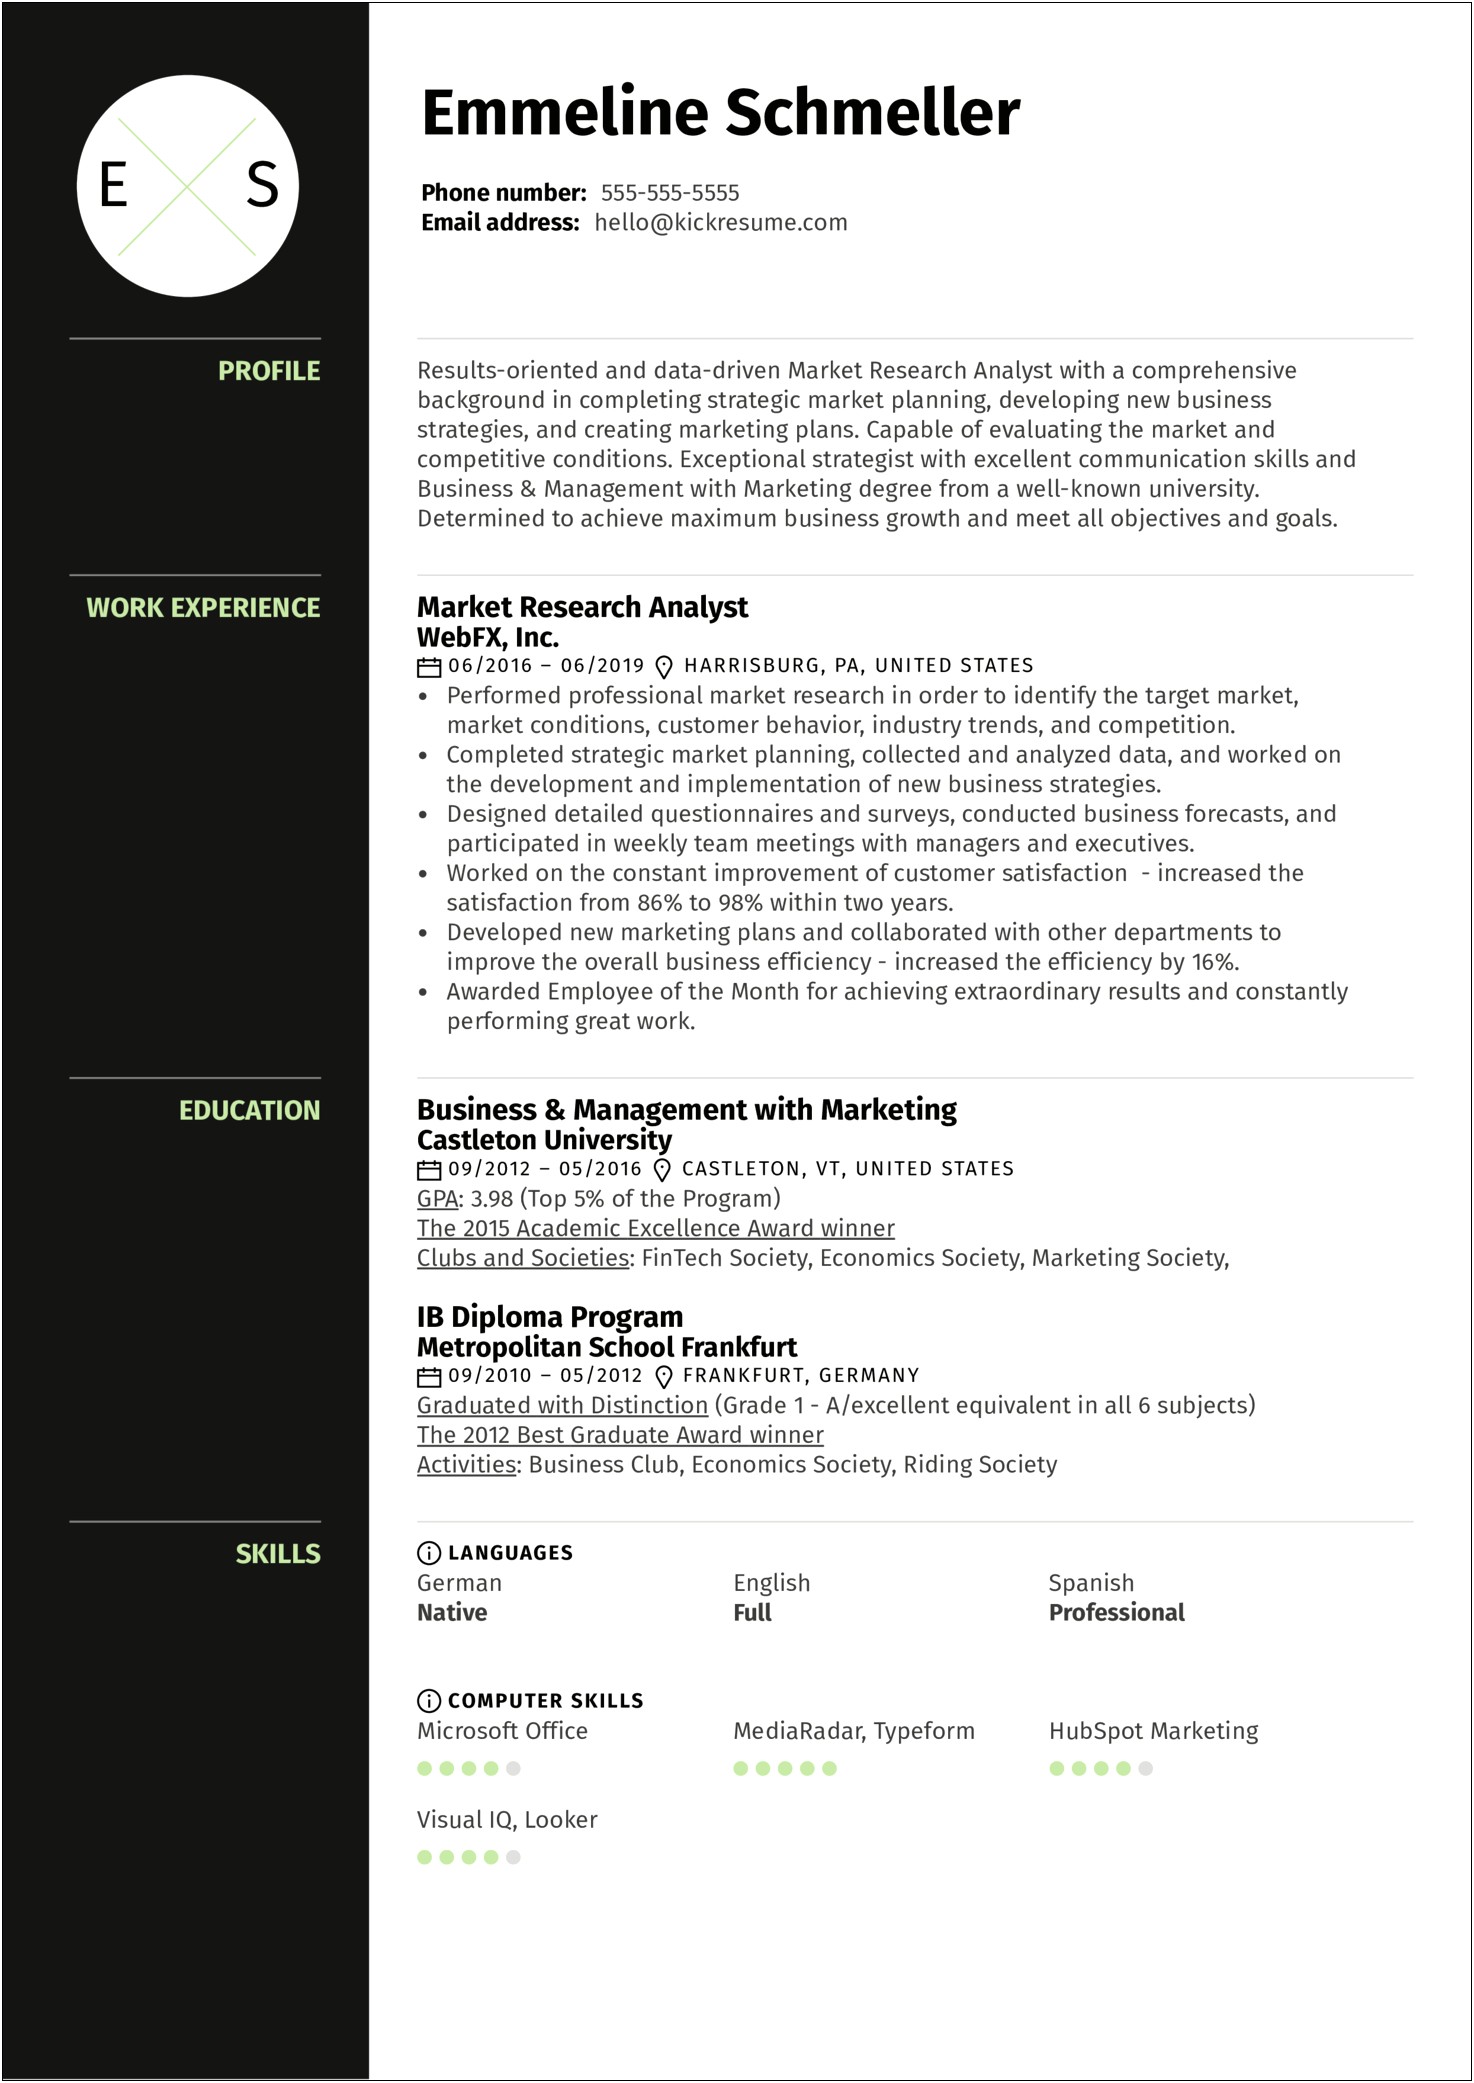 Sample Resume For Economic Research Analyst